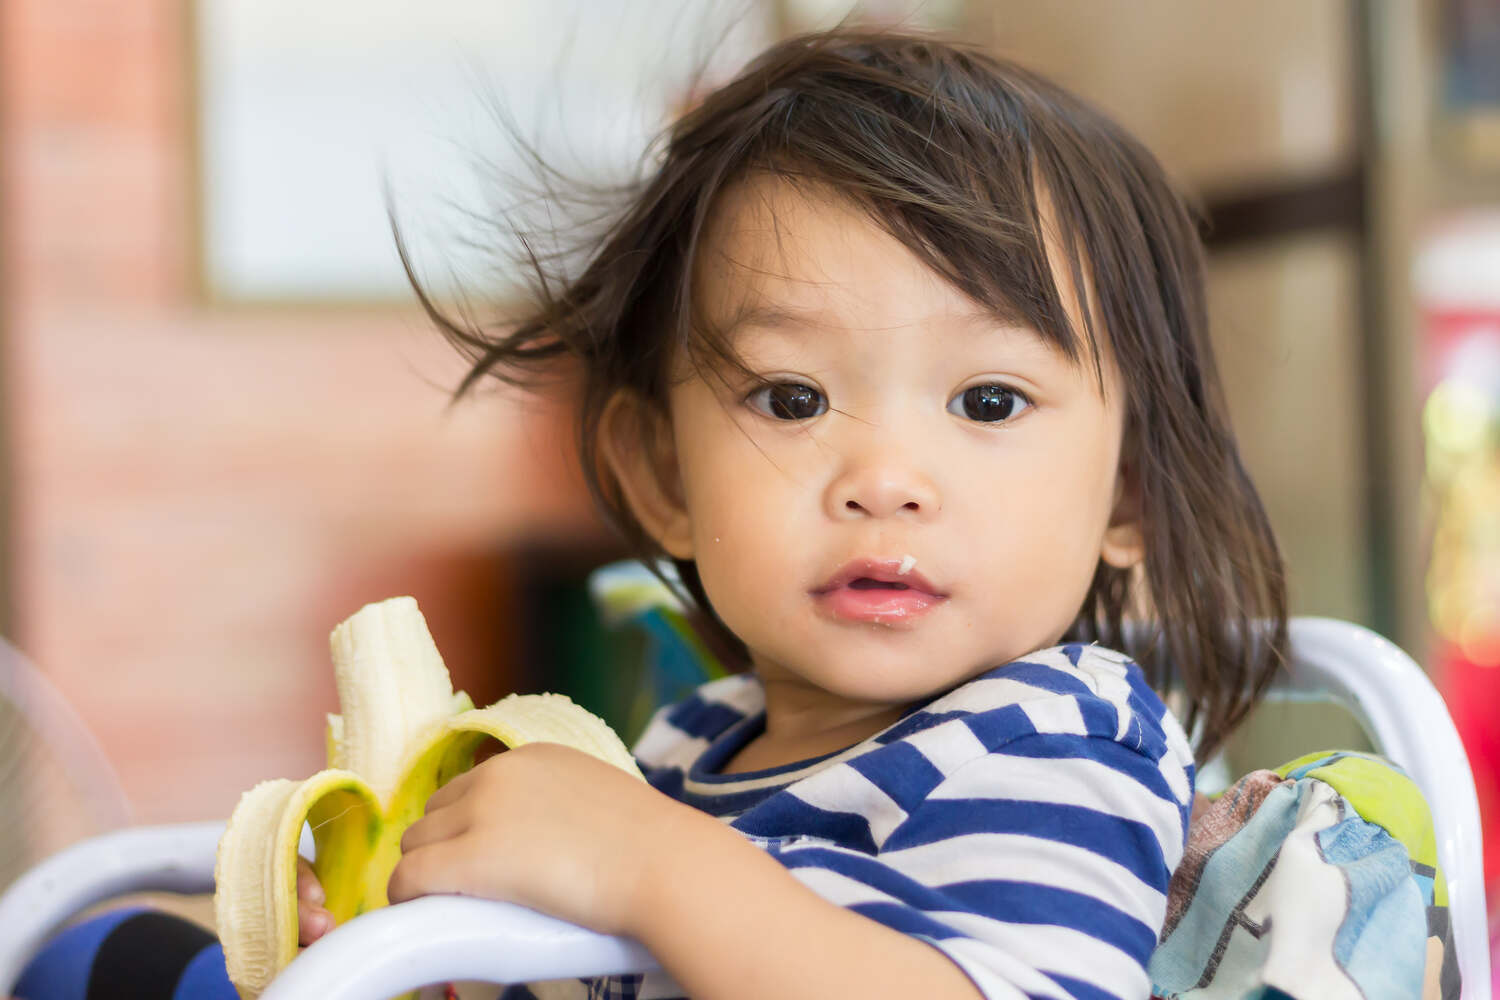 Banana is an ideal superfood for toddlers